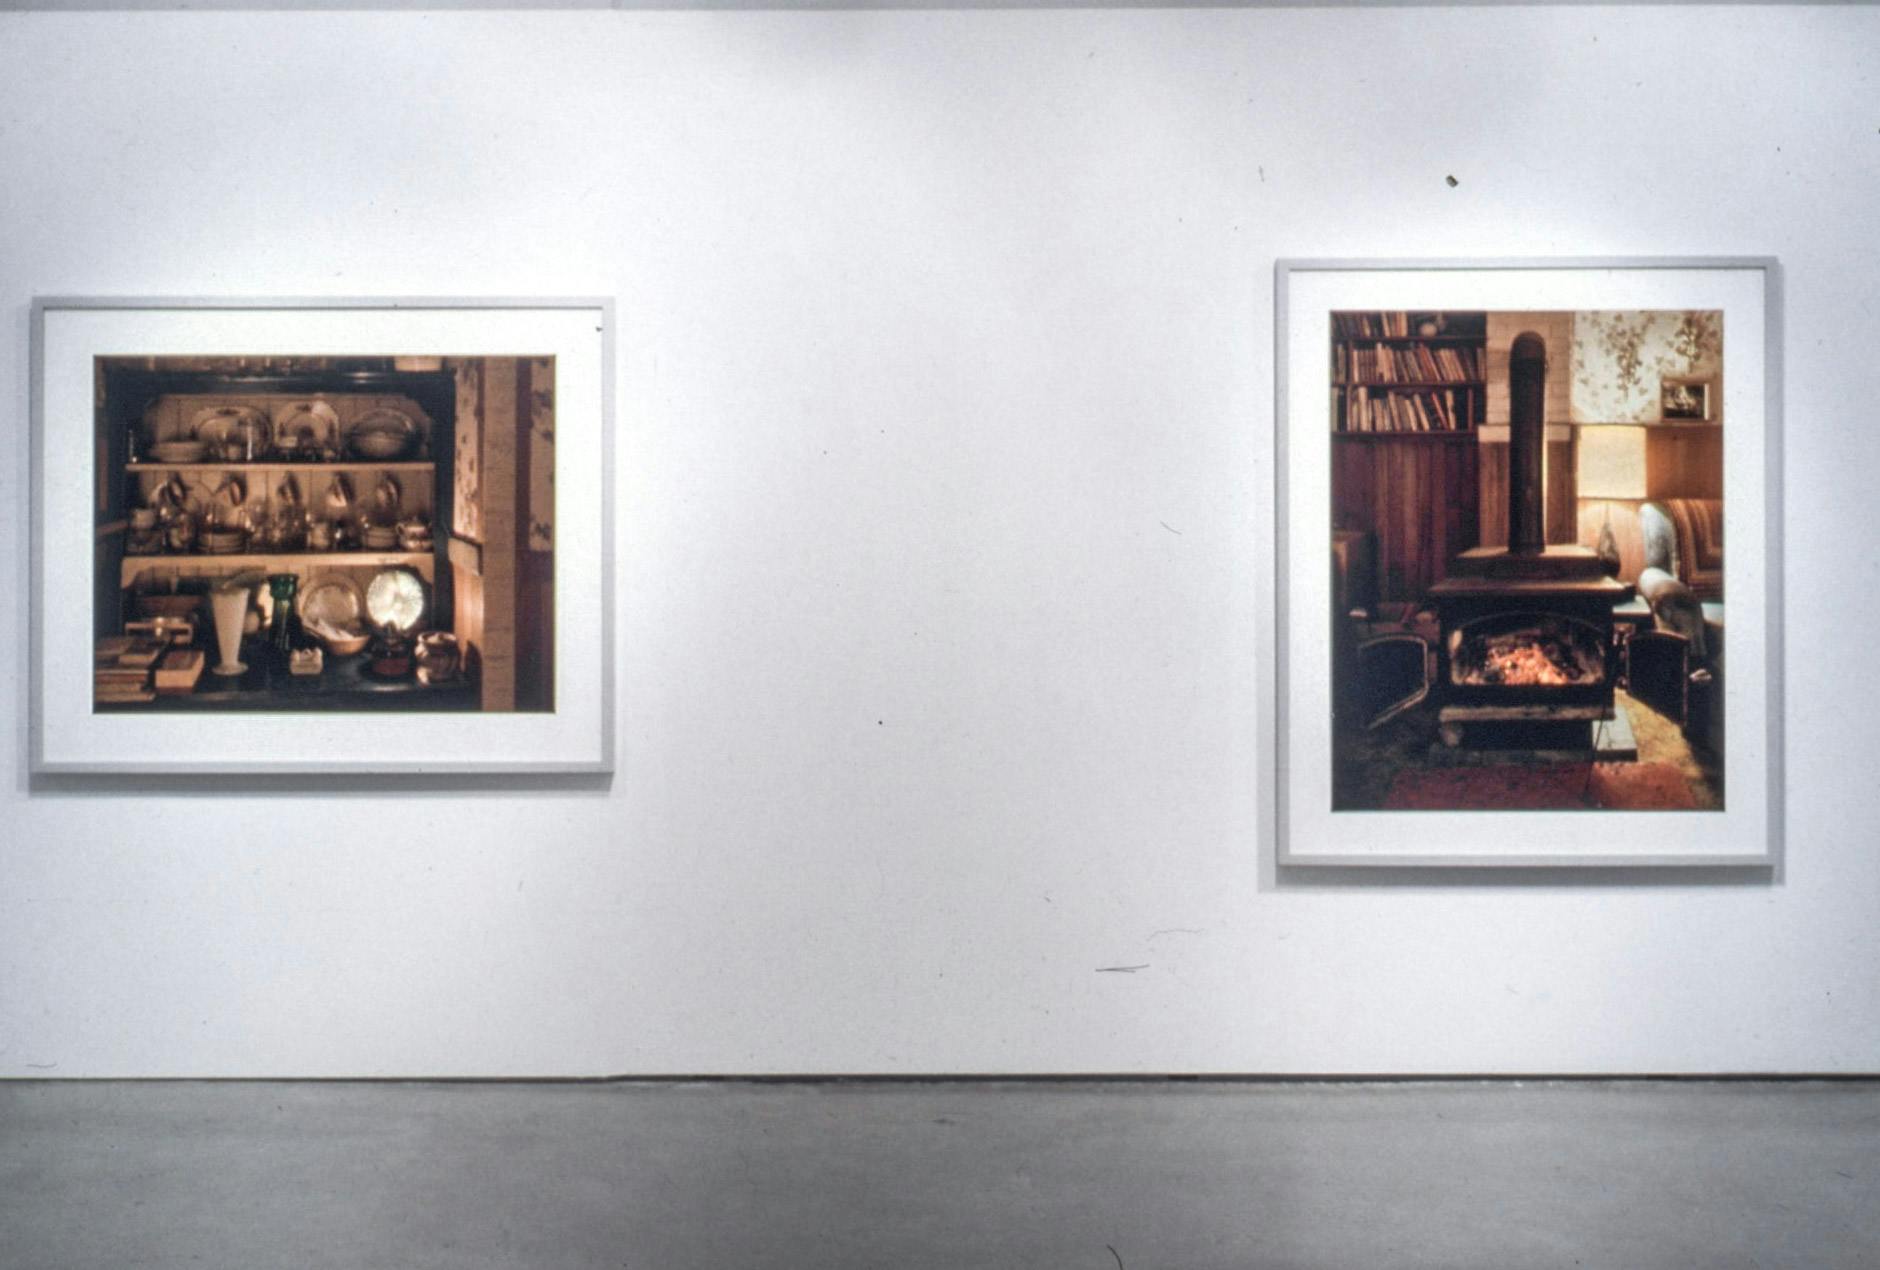 Two large-sized coloured photographs are installed on the gallery walls. Both of them depict the interior of a wood cabin. The one on the right shows a small fireplace beside bookshelves. 